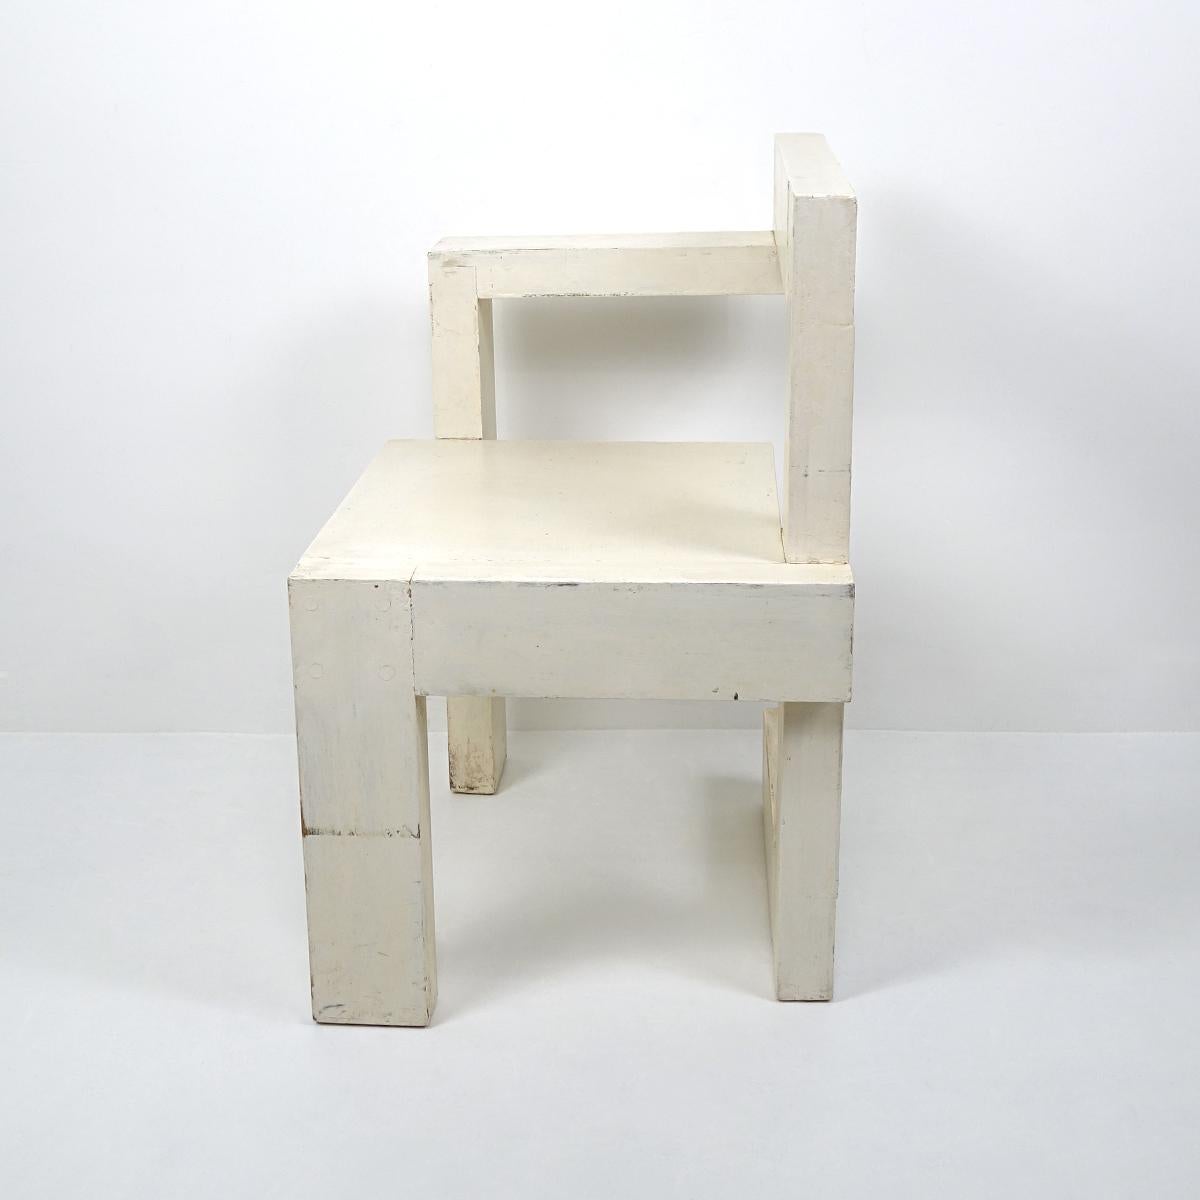 The Steltman chair owes its name to the famous jeweller Steltman who commissioned Rietveld in 1963 to rebuild and furnish his shop at in The Hague. Rietveld was 75 at the time, and it was his last design.

The asymmetrical chair is made entirely